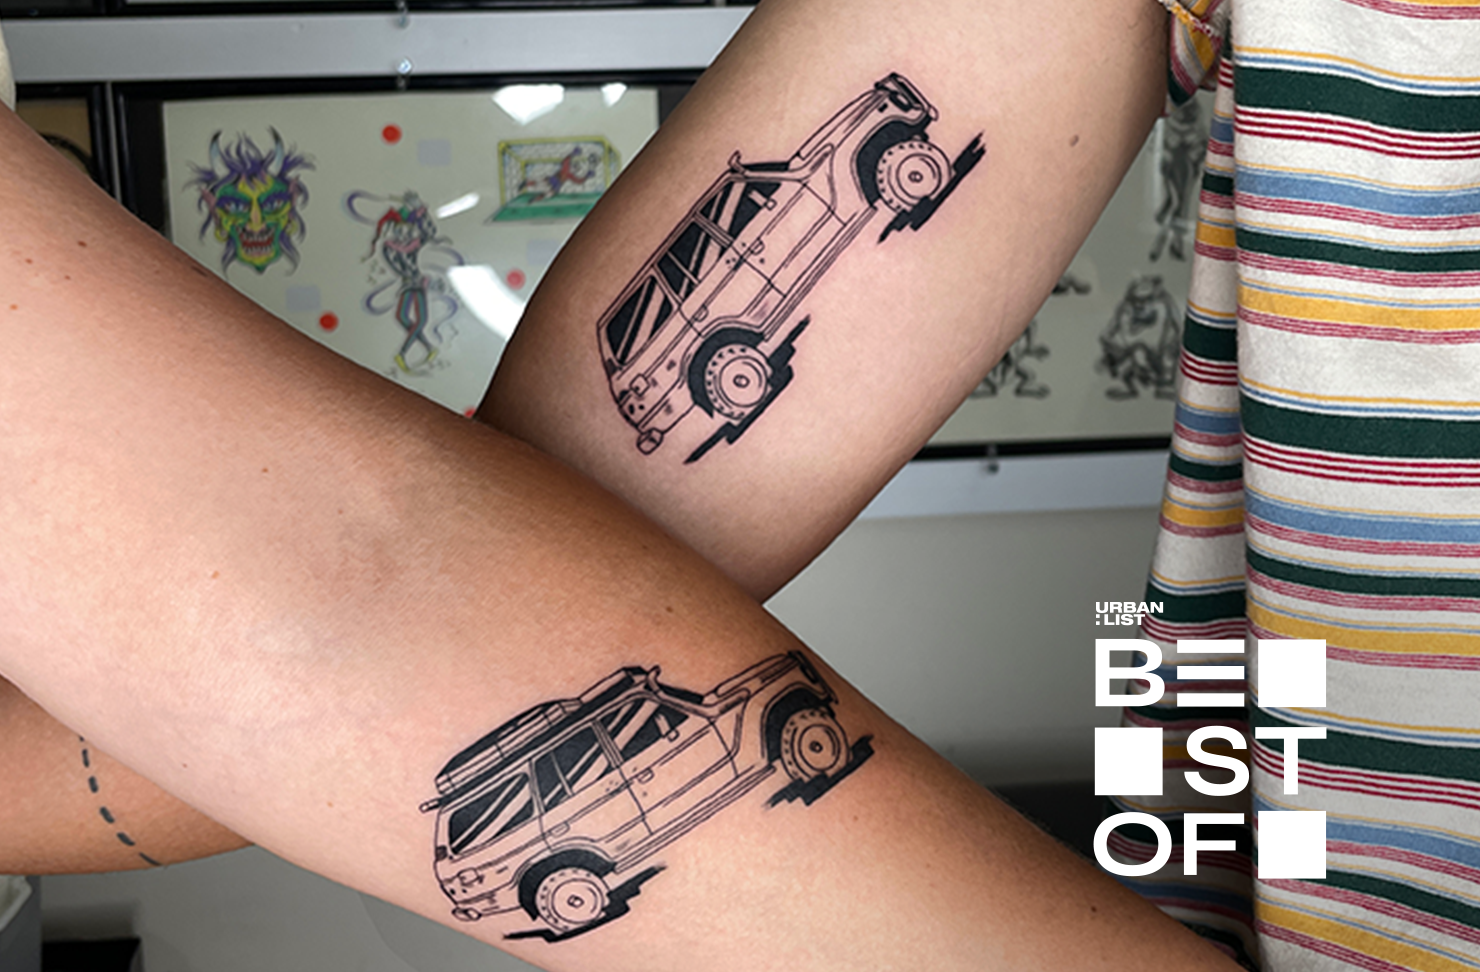 North End Tattoo - Added another piece to this car themed leg! Done by  Aaron | Facebook